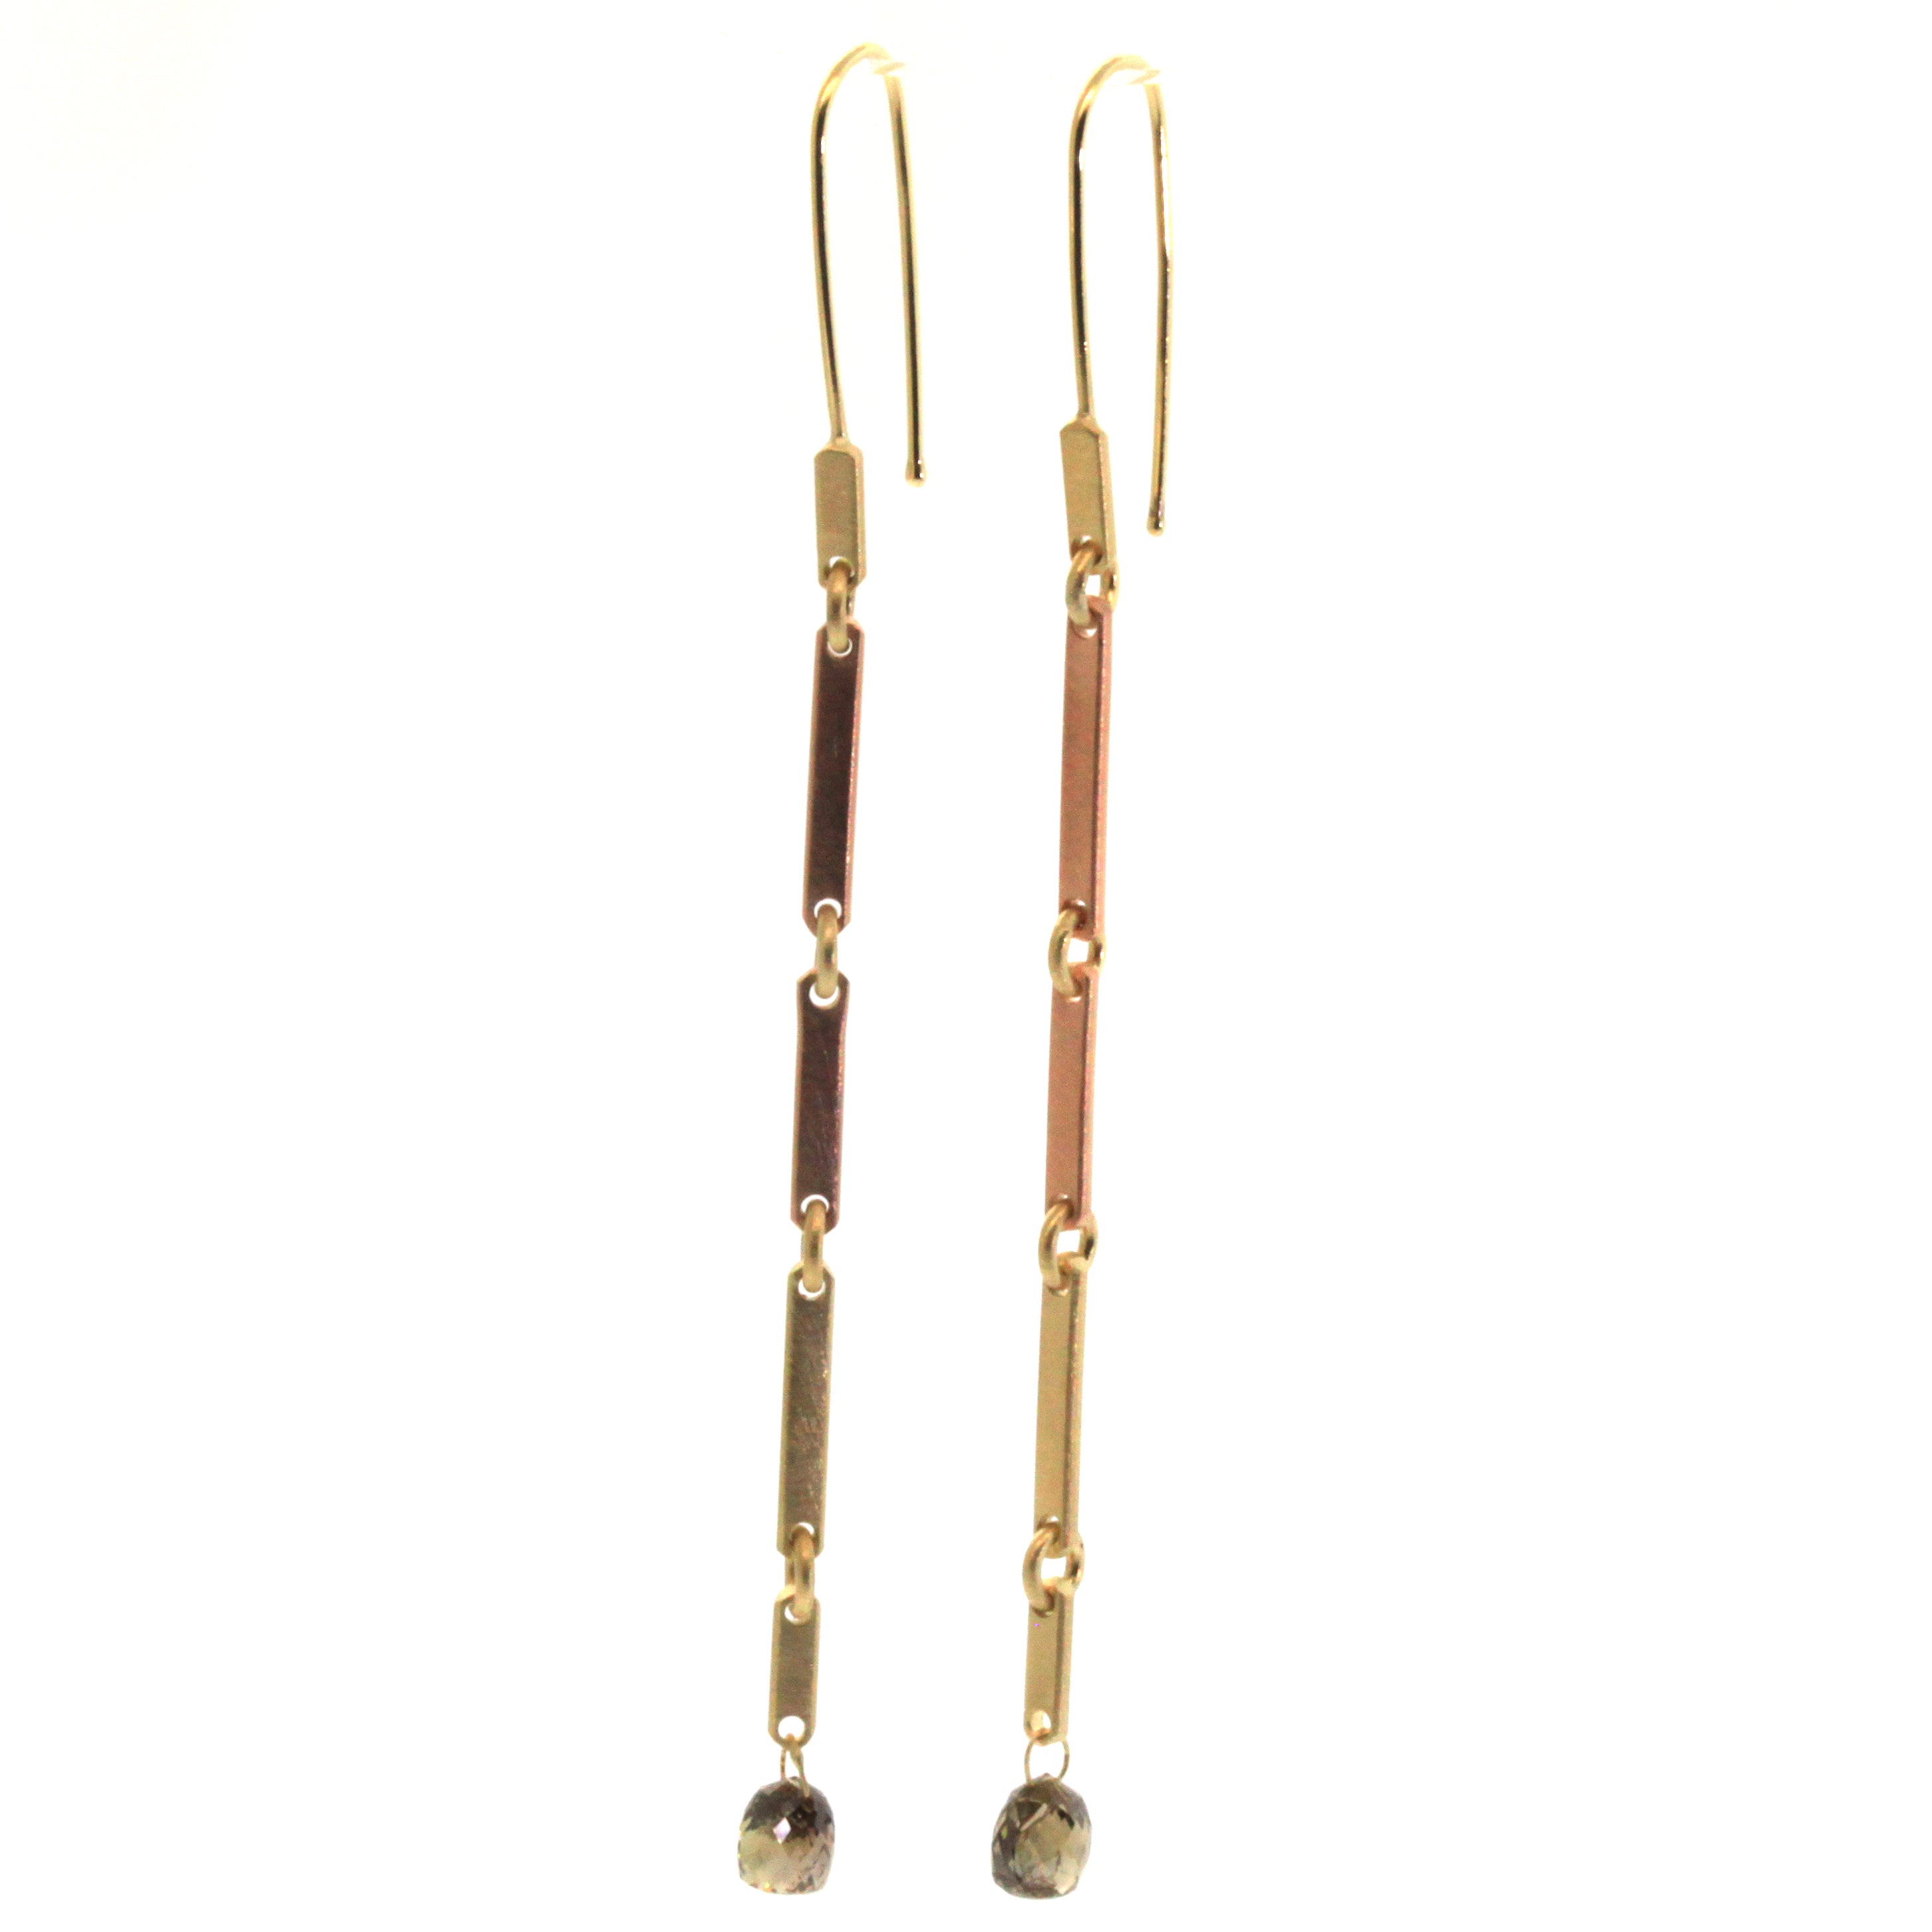 Mixed Metal Diamond Bar Earrings crafted by Rebecca Lankford at Studio 703 + RLD in Houston, Texas. Every pair is one of a kind made specially for you. 